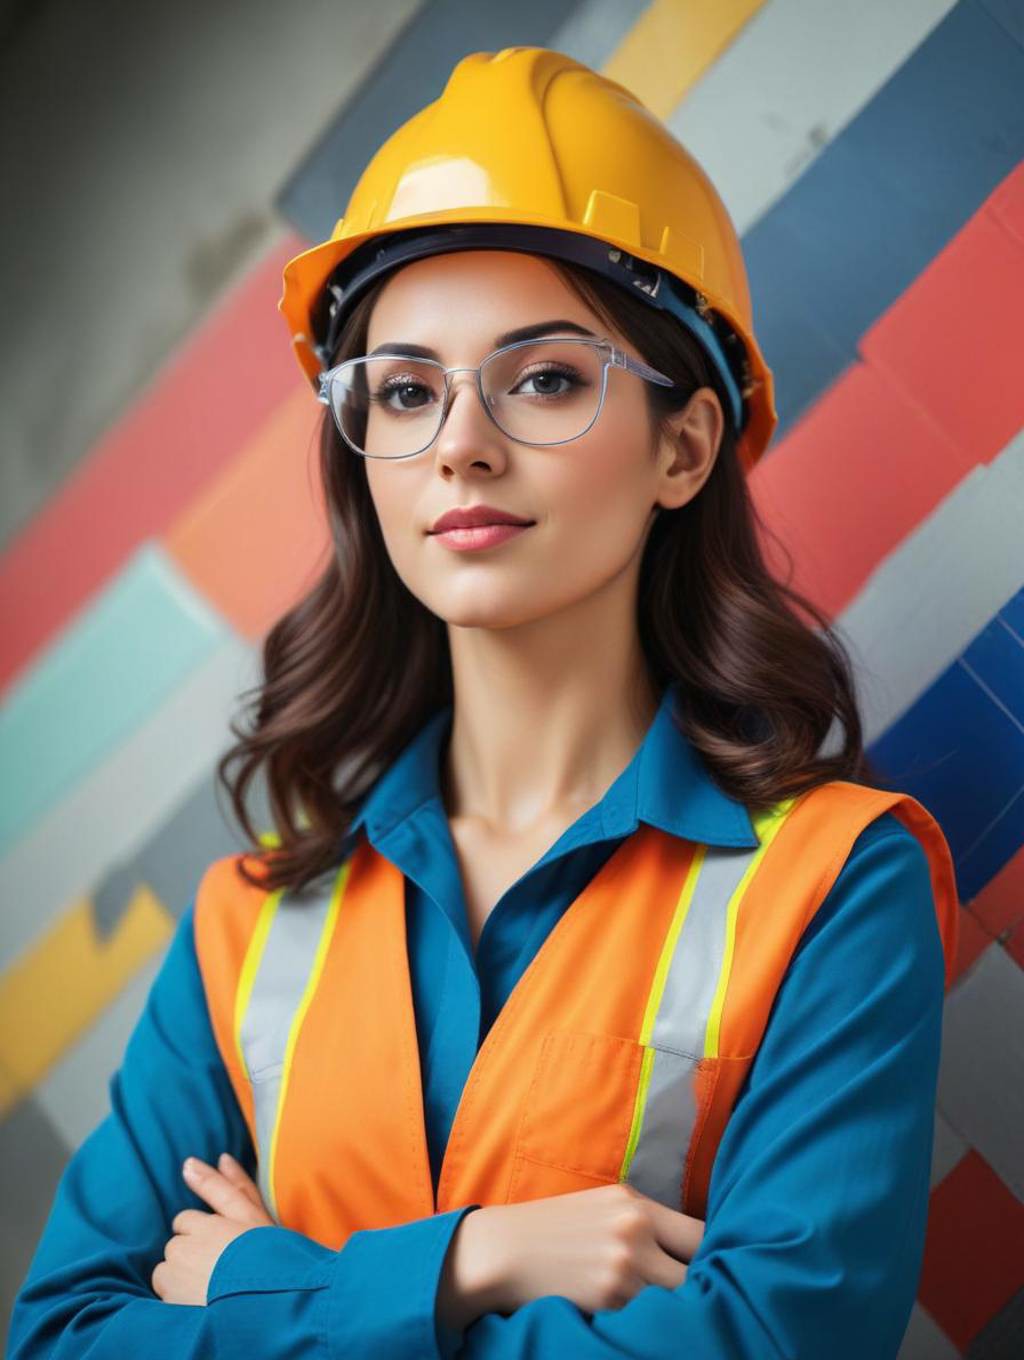 Engineers Women: Gallery Frames & Portrait Photography-Theme:4